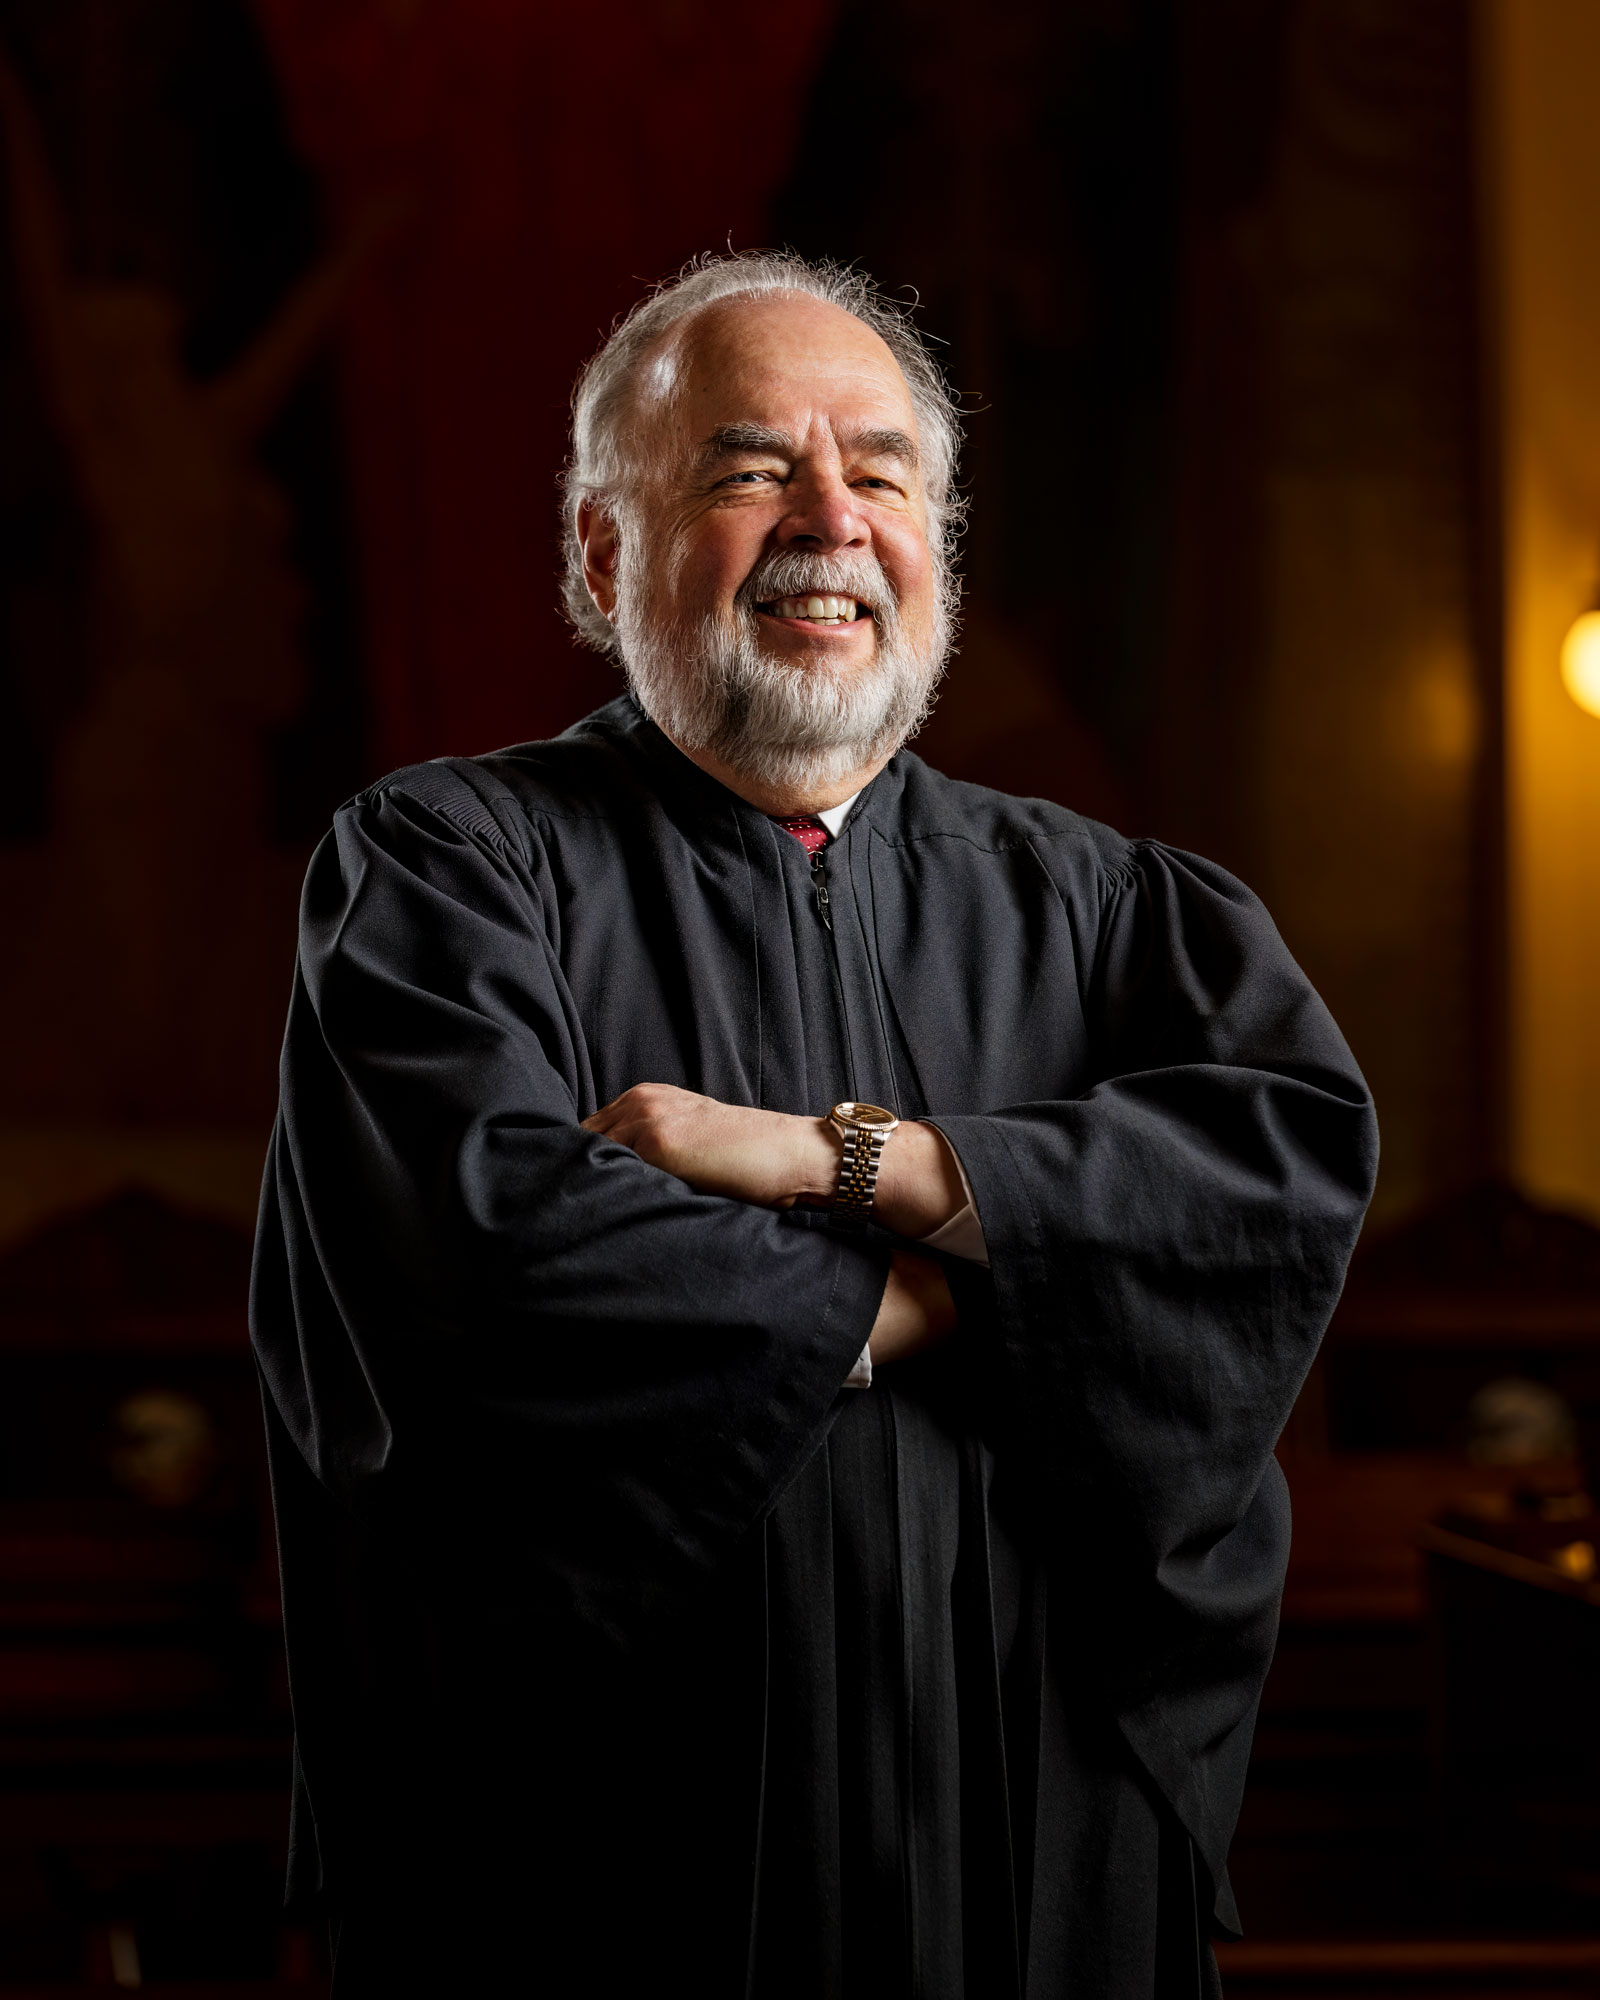 Chief Justice Gilbertson Aaron C. Packard Photography Portrait